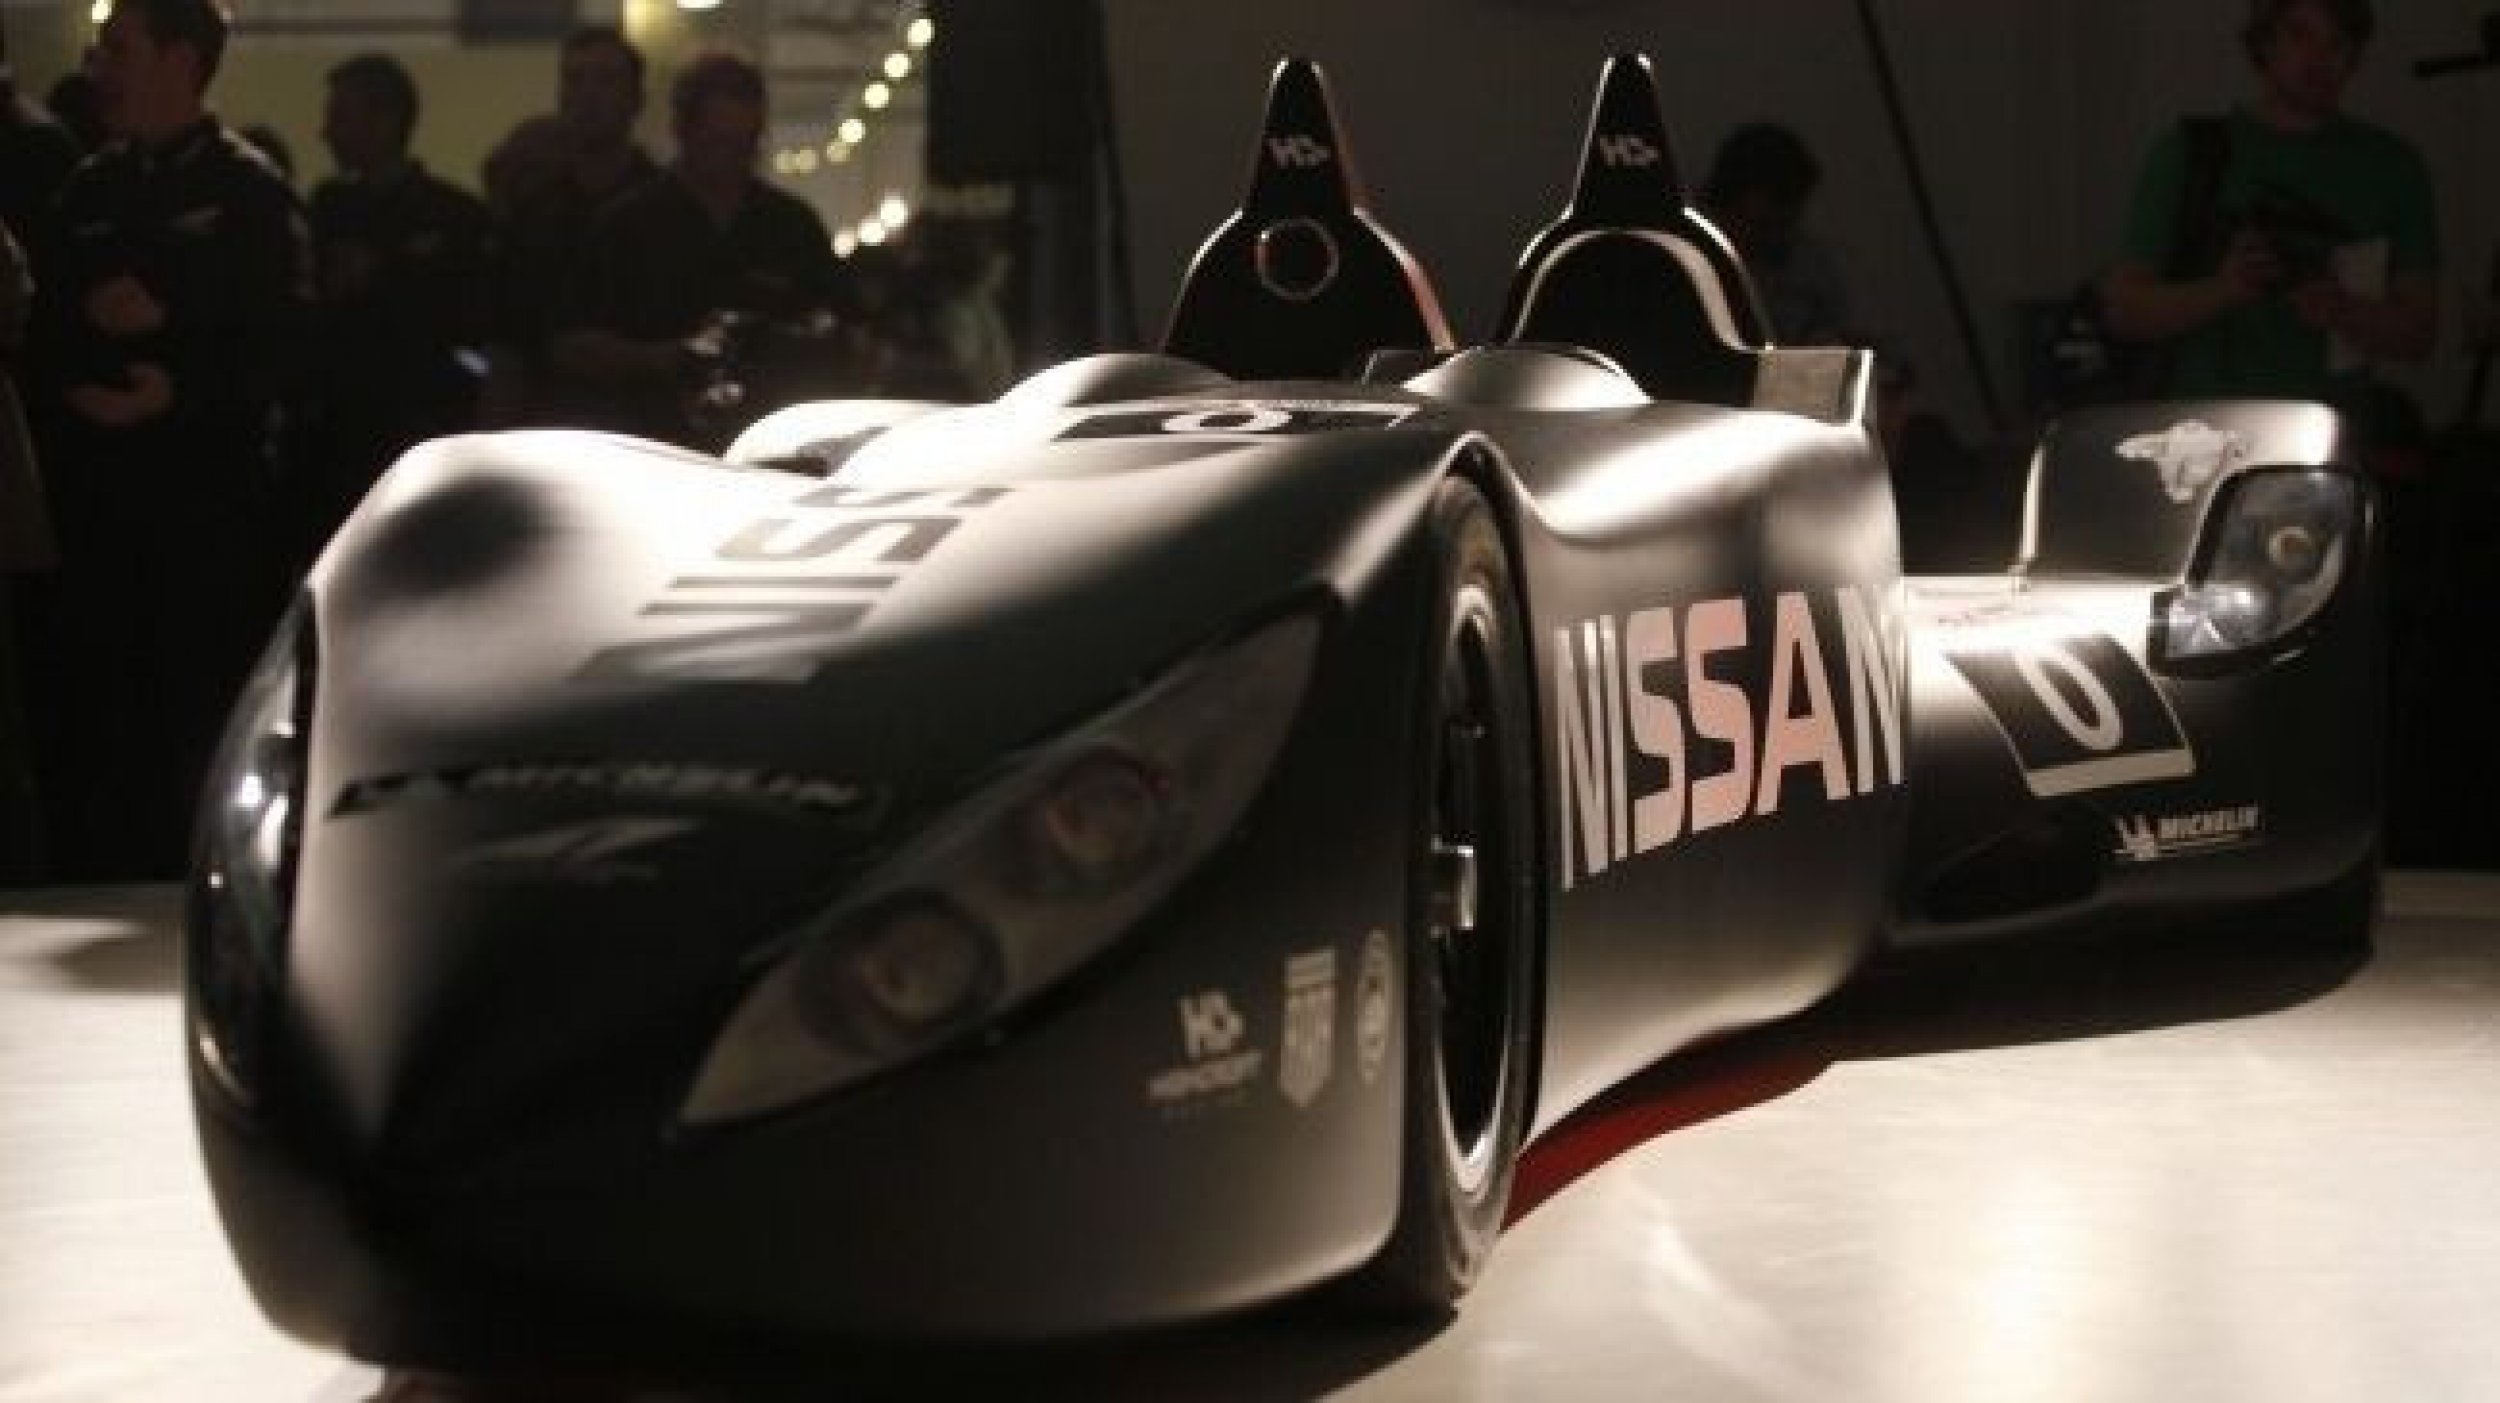 Nissan Puts Full Backing Behind Ground-Breaking DeltaWing Racecar